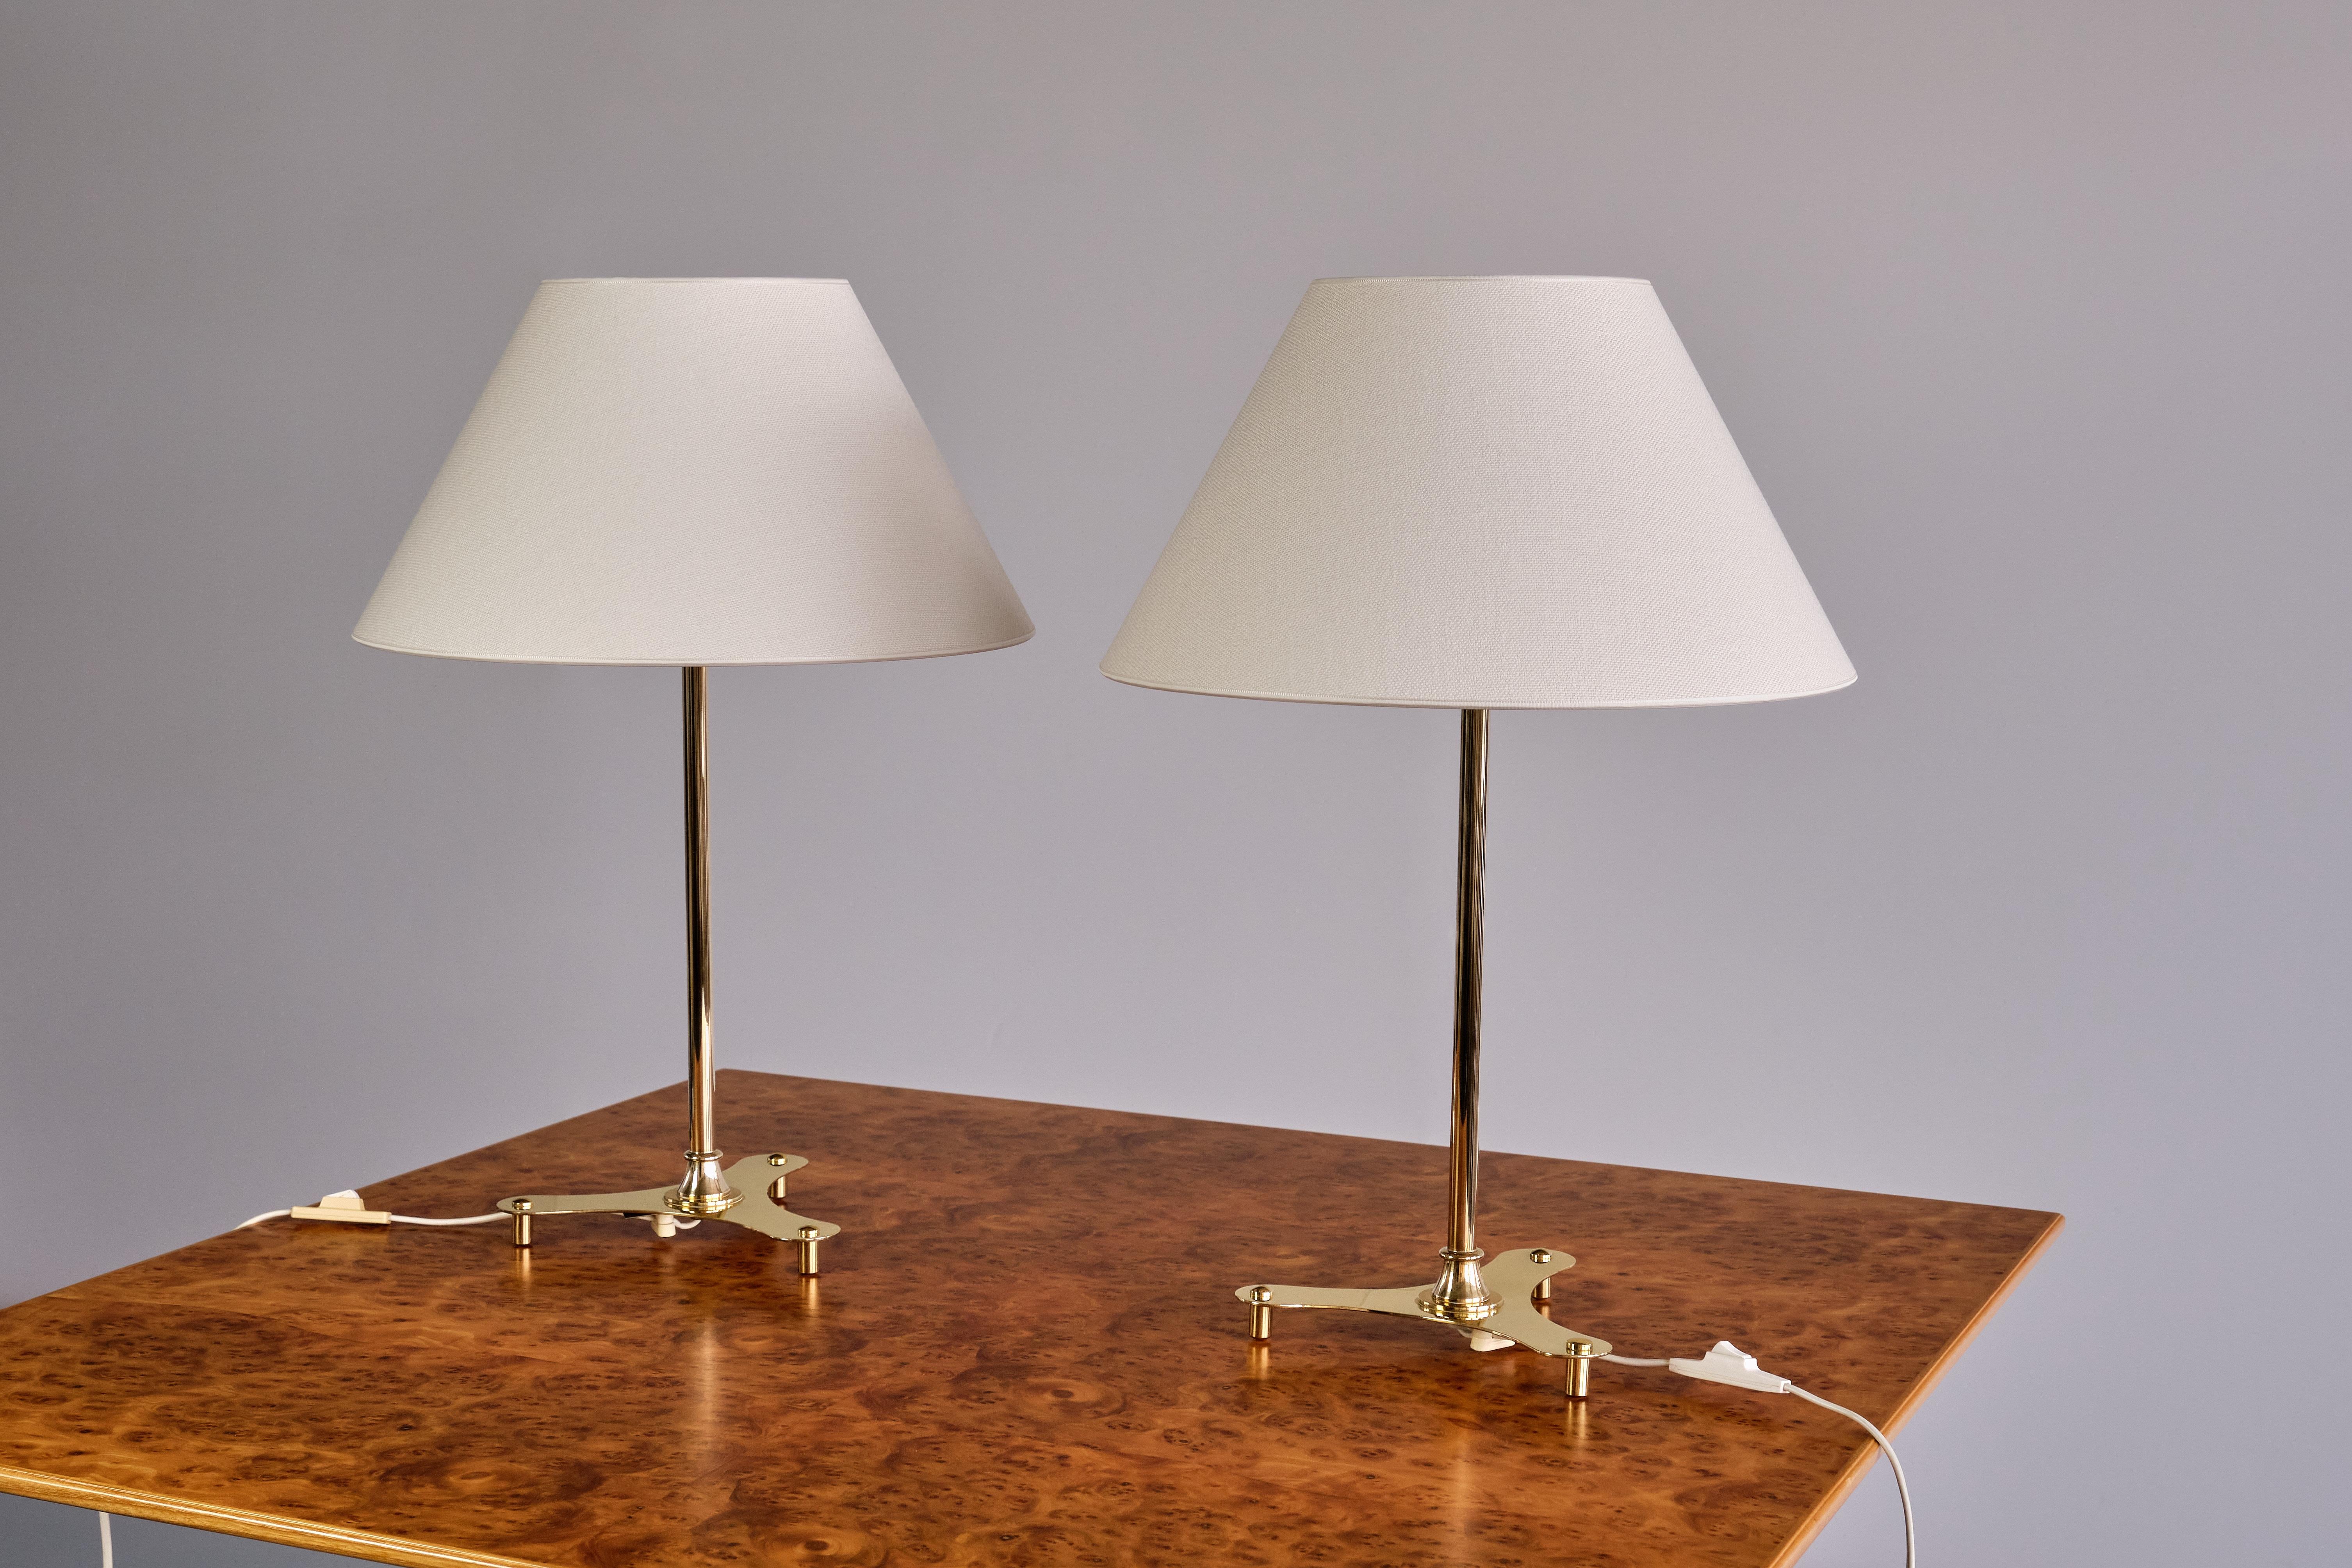 This rare pair of table lamps was designed by Josef Frank and produced by Svenskt Tenn in Sweden in the 1950s. The lamps are marked with the model number 2467/2 on the bottom of the base. This model is no longer in production and was also featured